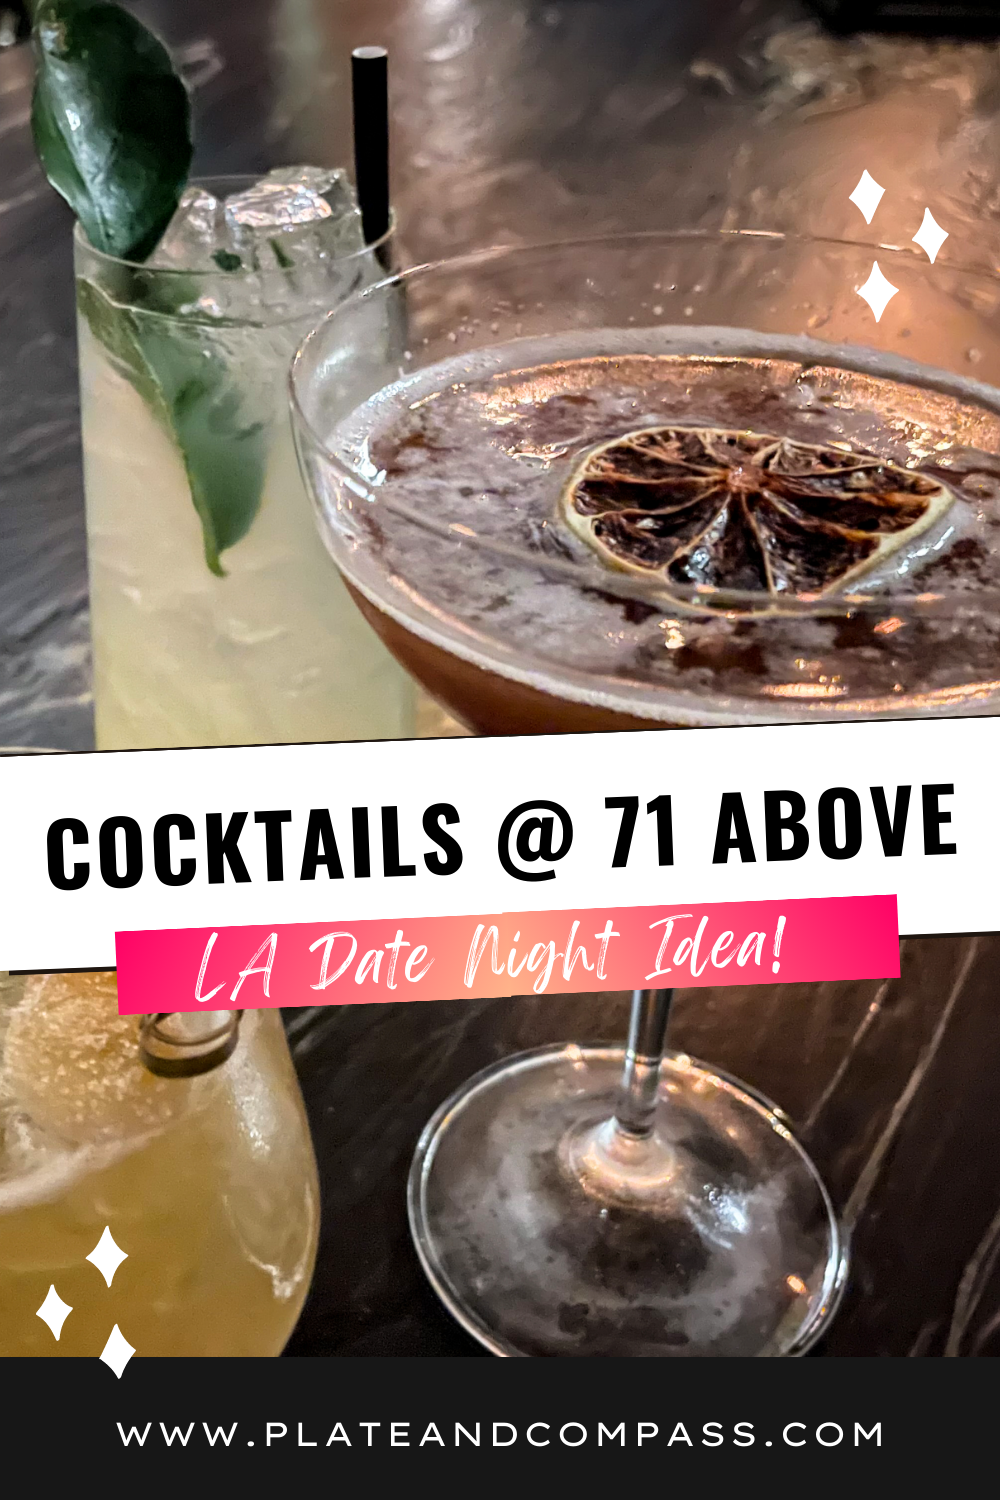 Pinterest image with cocktails and text: "Cocktails @ 71 Above, LA Date Night Idea"